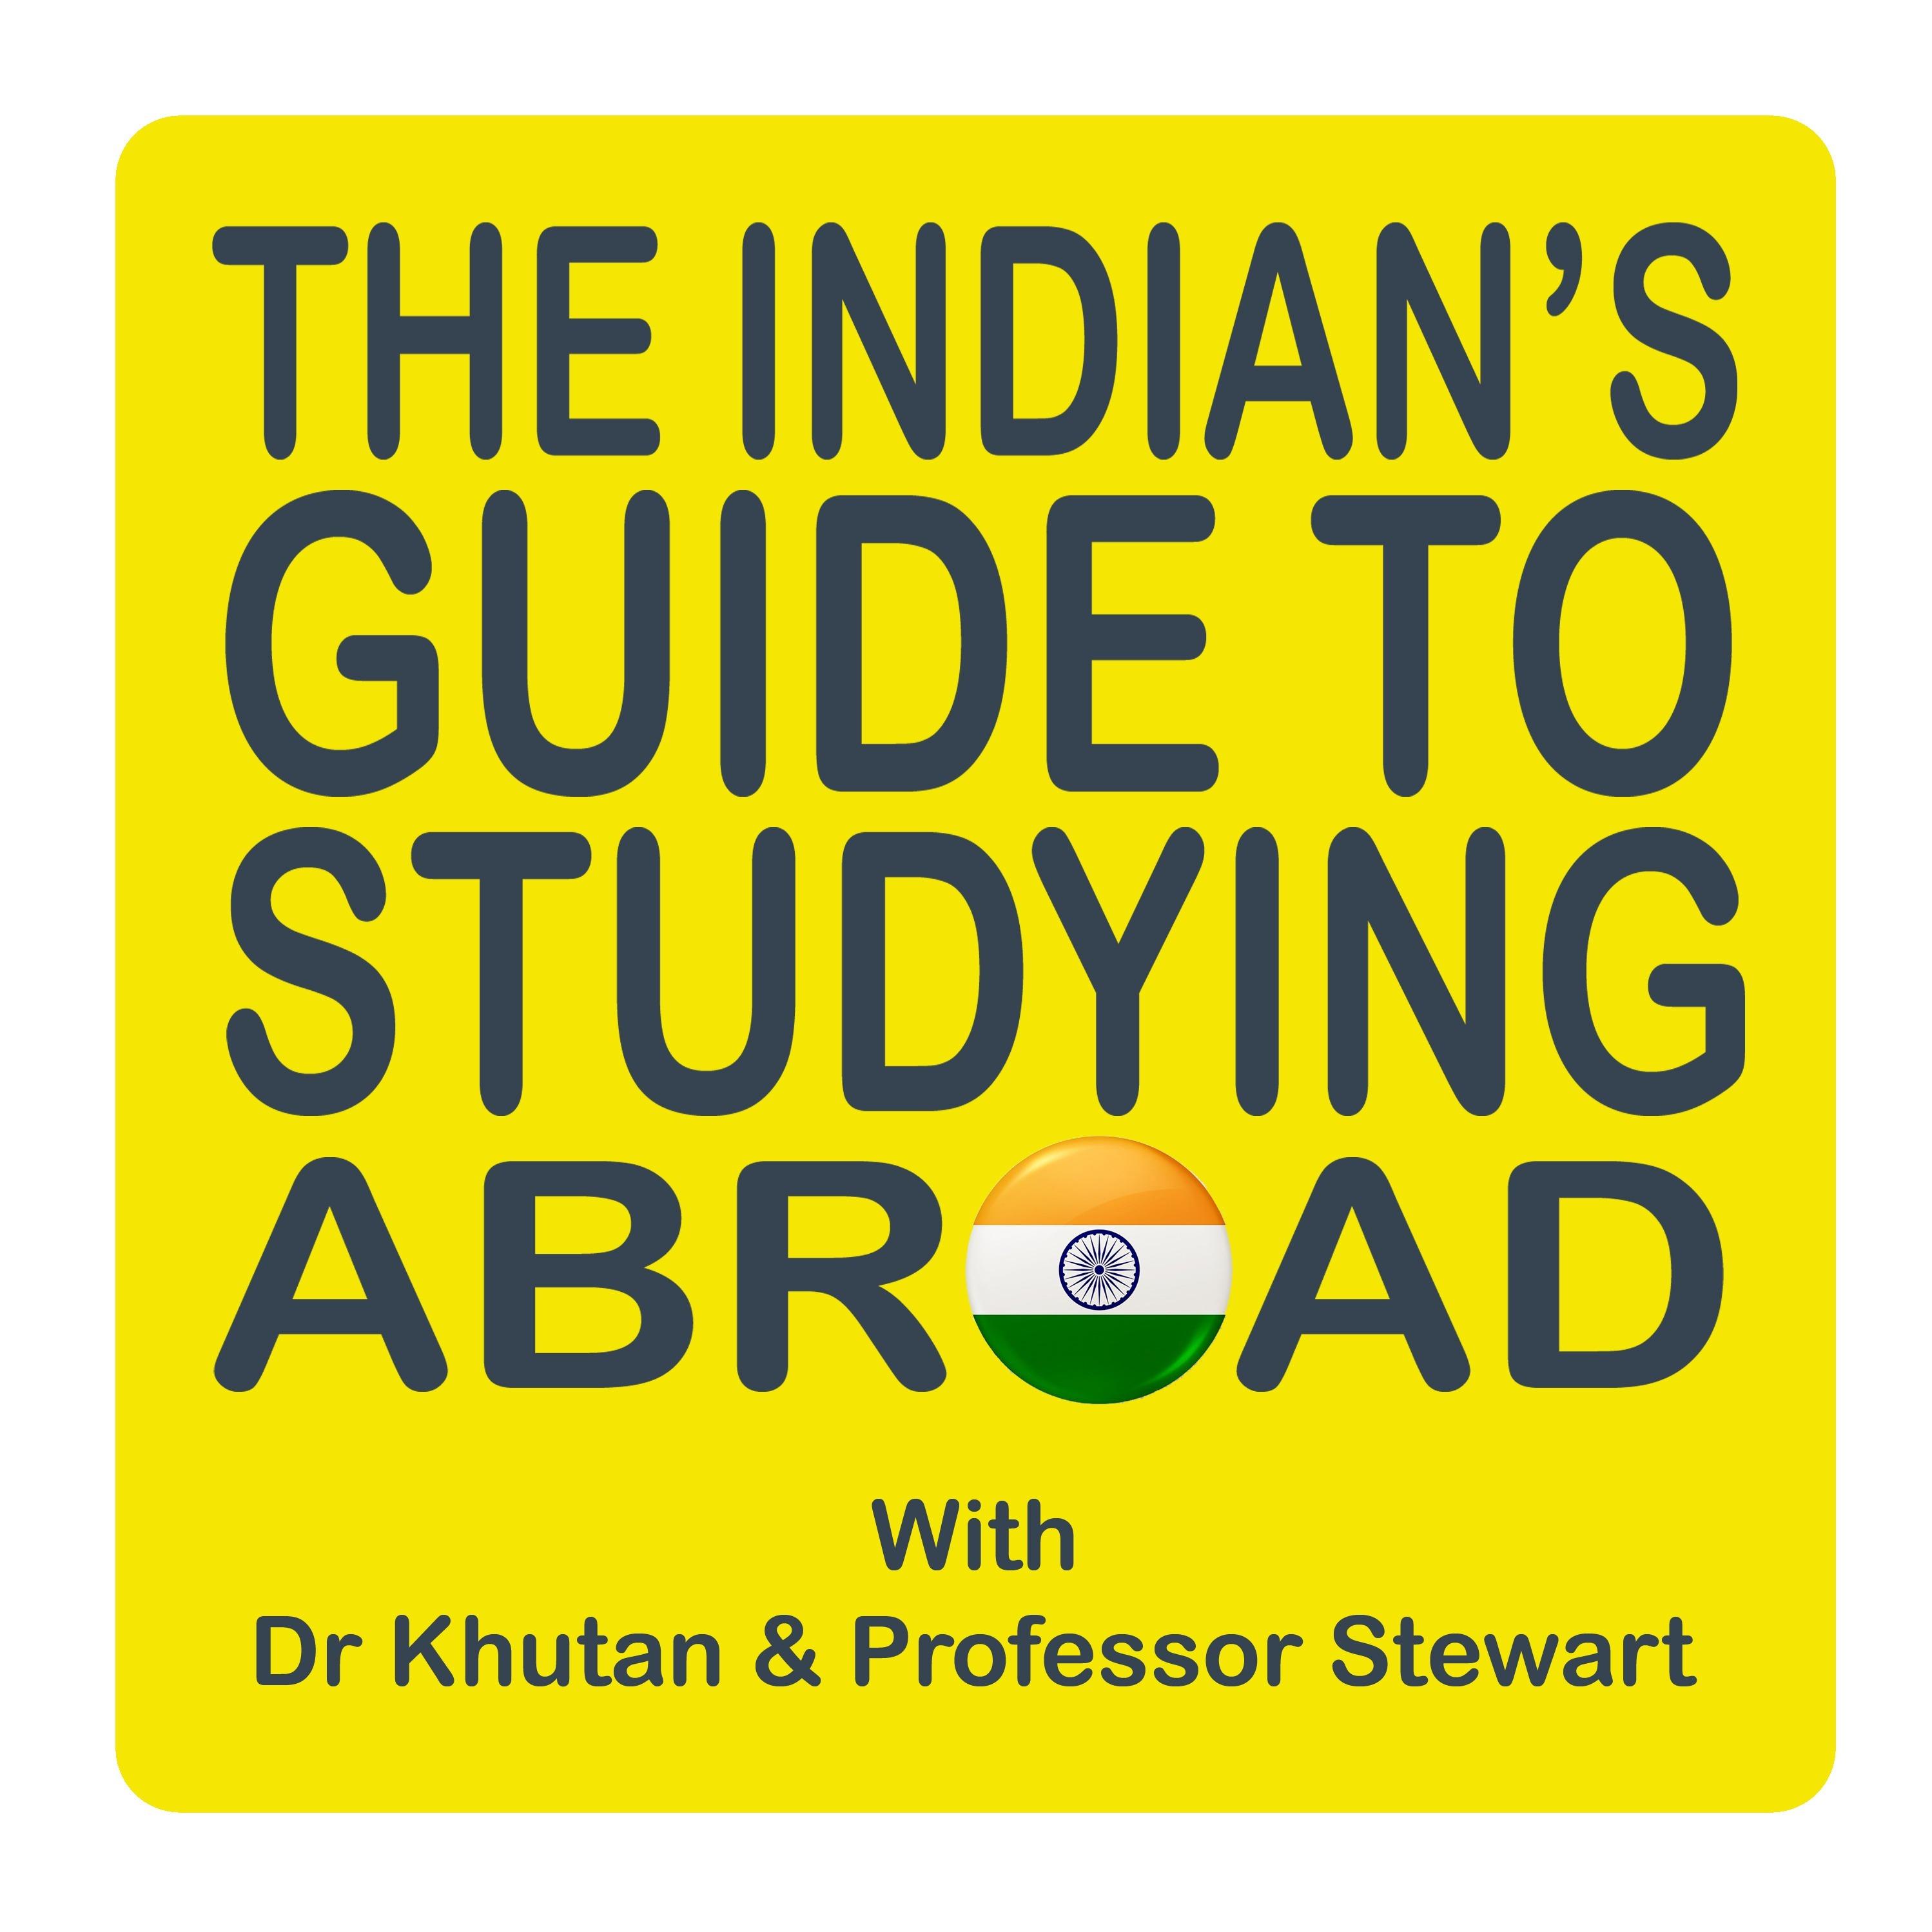 The Indian's Guide to Studying Abroad